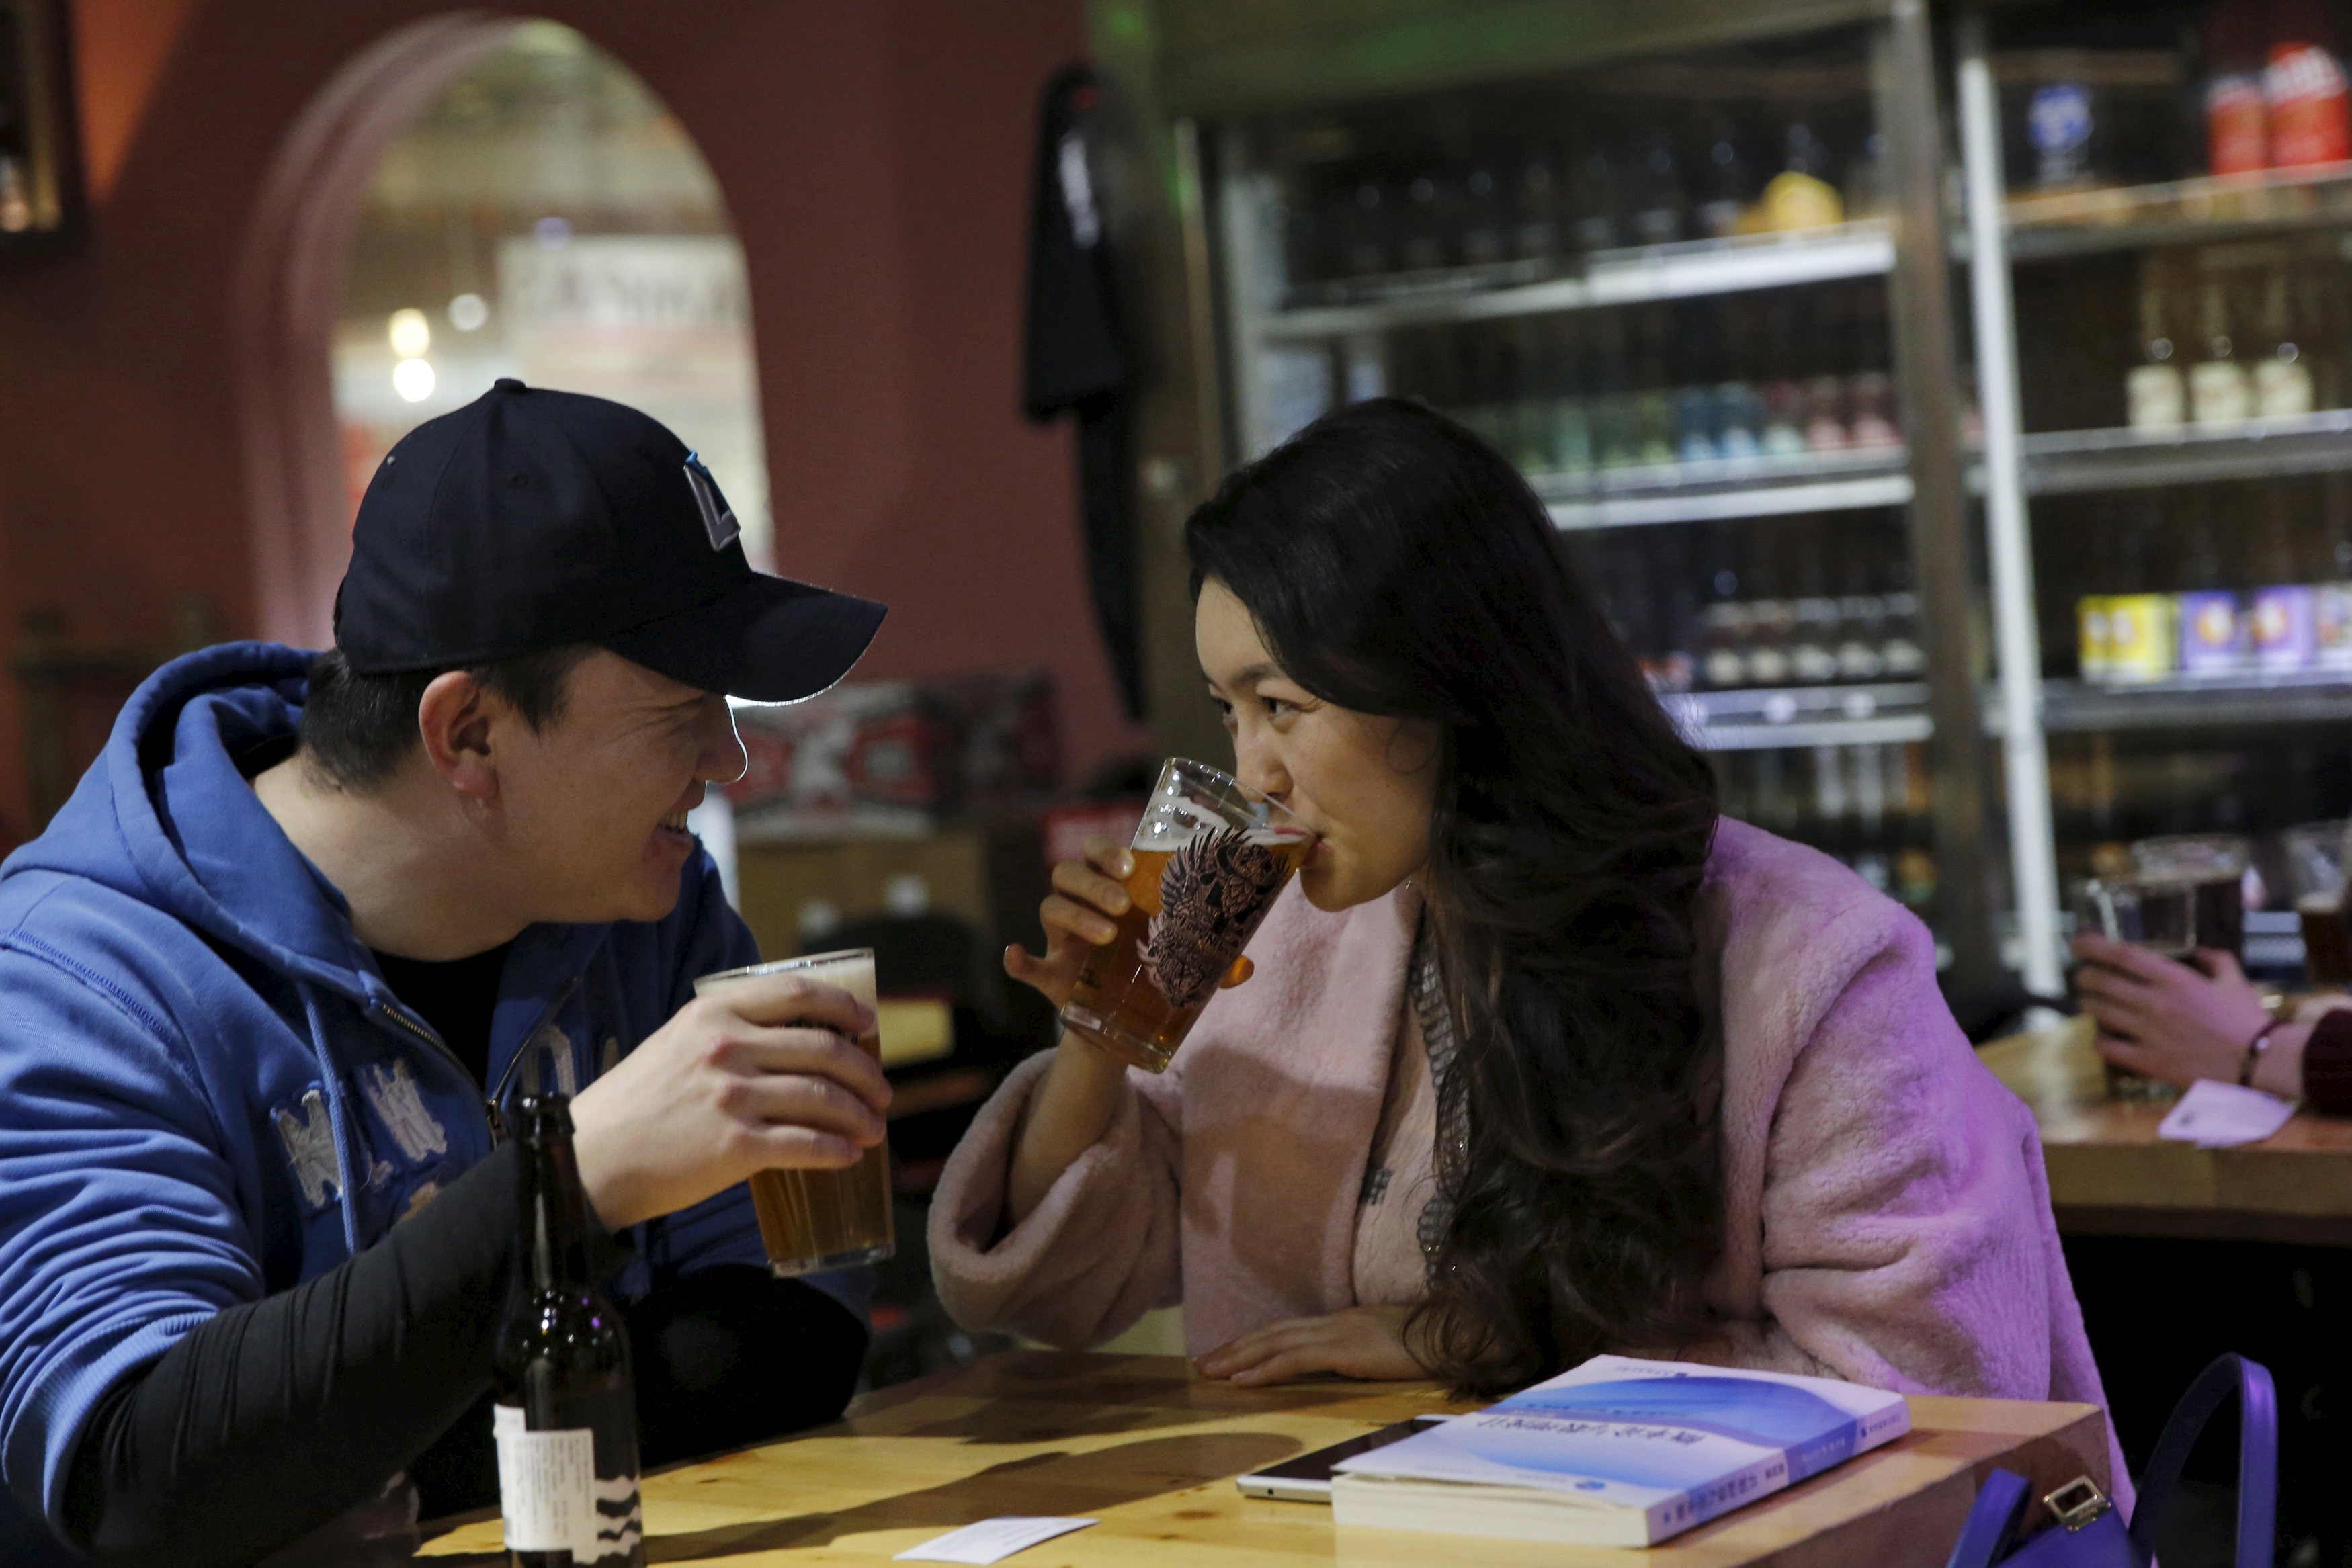 Beer remains the No 1 alcoholic beverage in China, which accounts for nearly a quarter of global beer consumption. Photo: Reuters